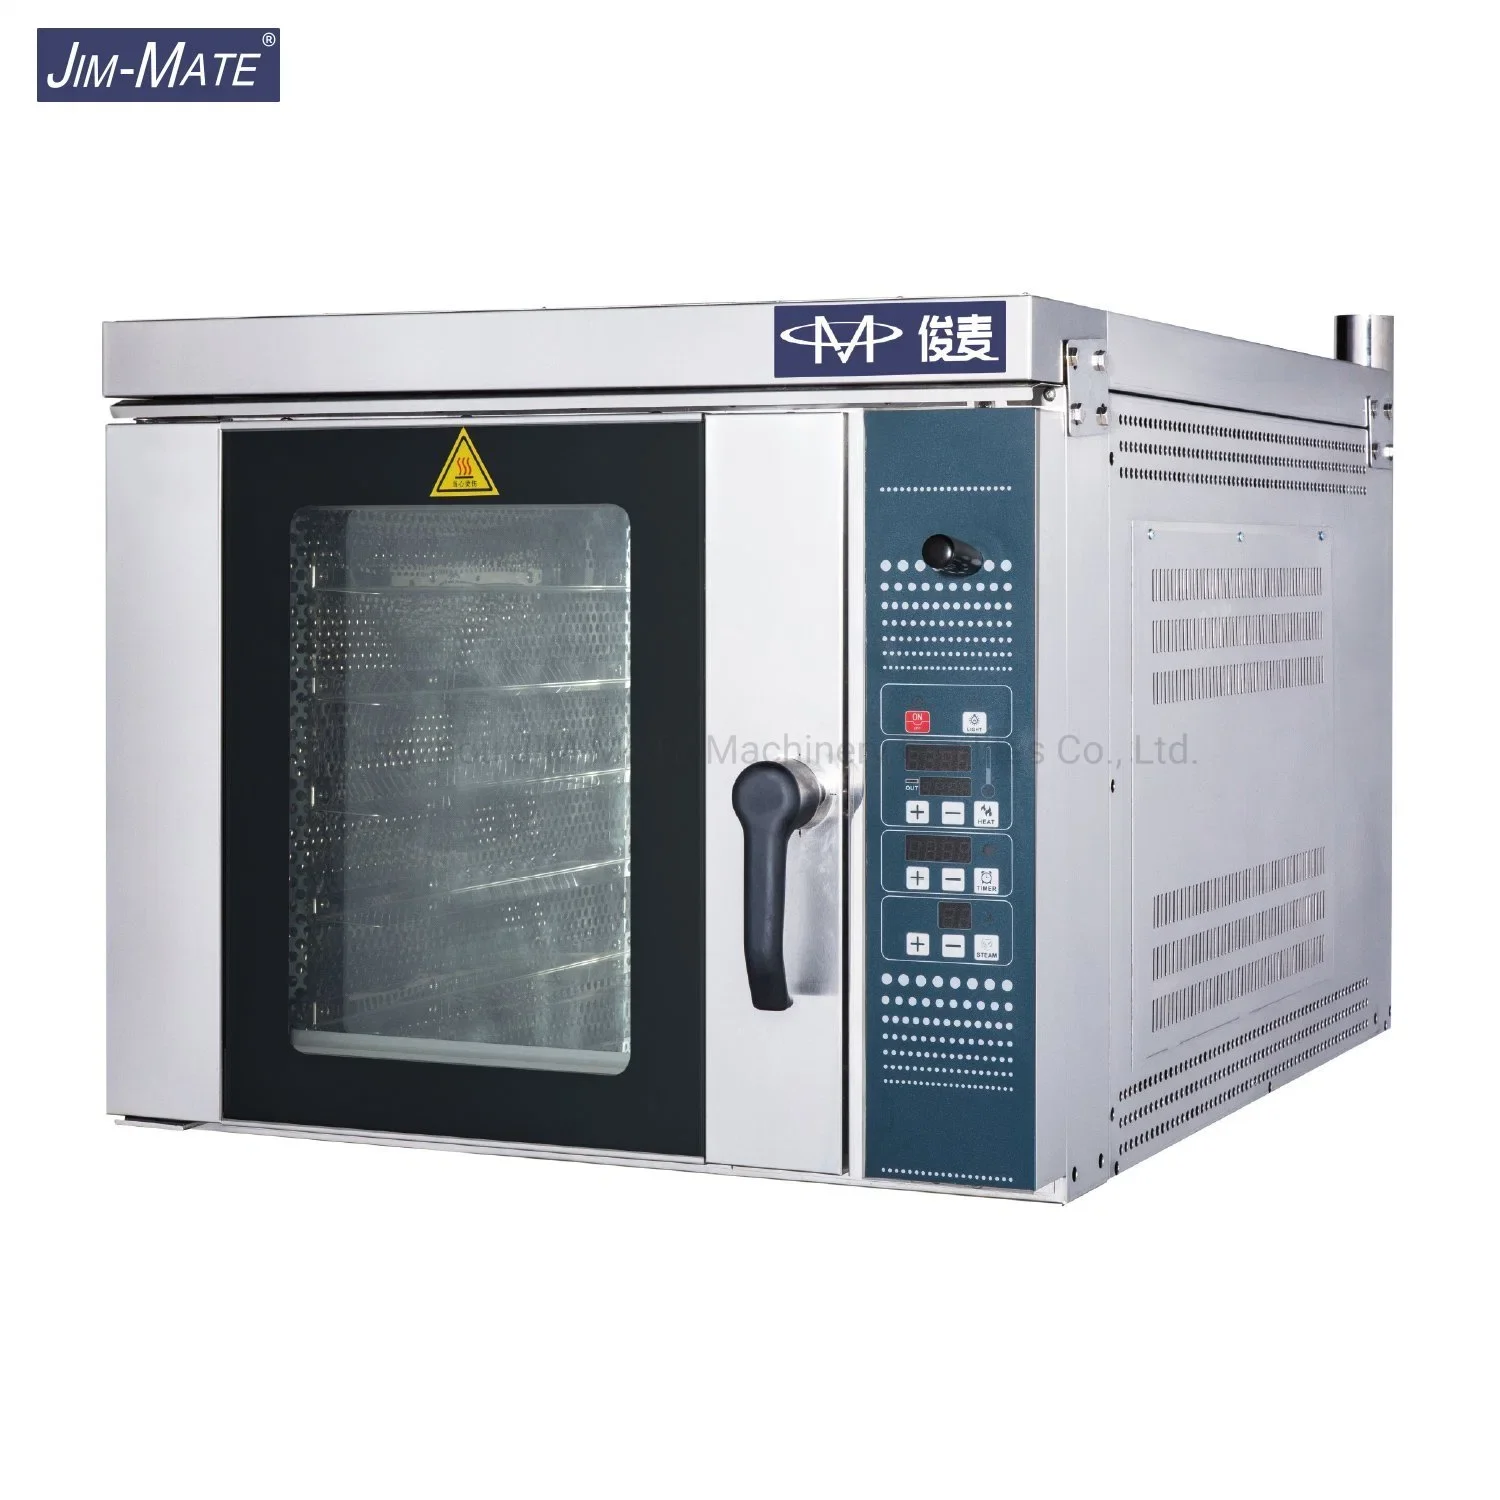 Bakery Equipment Kitchen Catering Equipment Commercial Use Cake Shop Machine 5 Trays Bread Cake Pizza Baking Machine Electric digital catering baking equipment bread bakery souffle pancake souffle cake machine